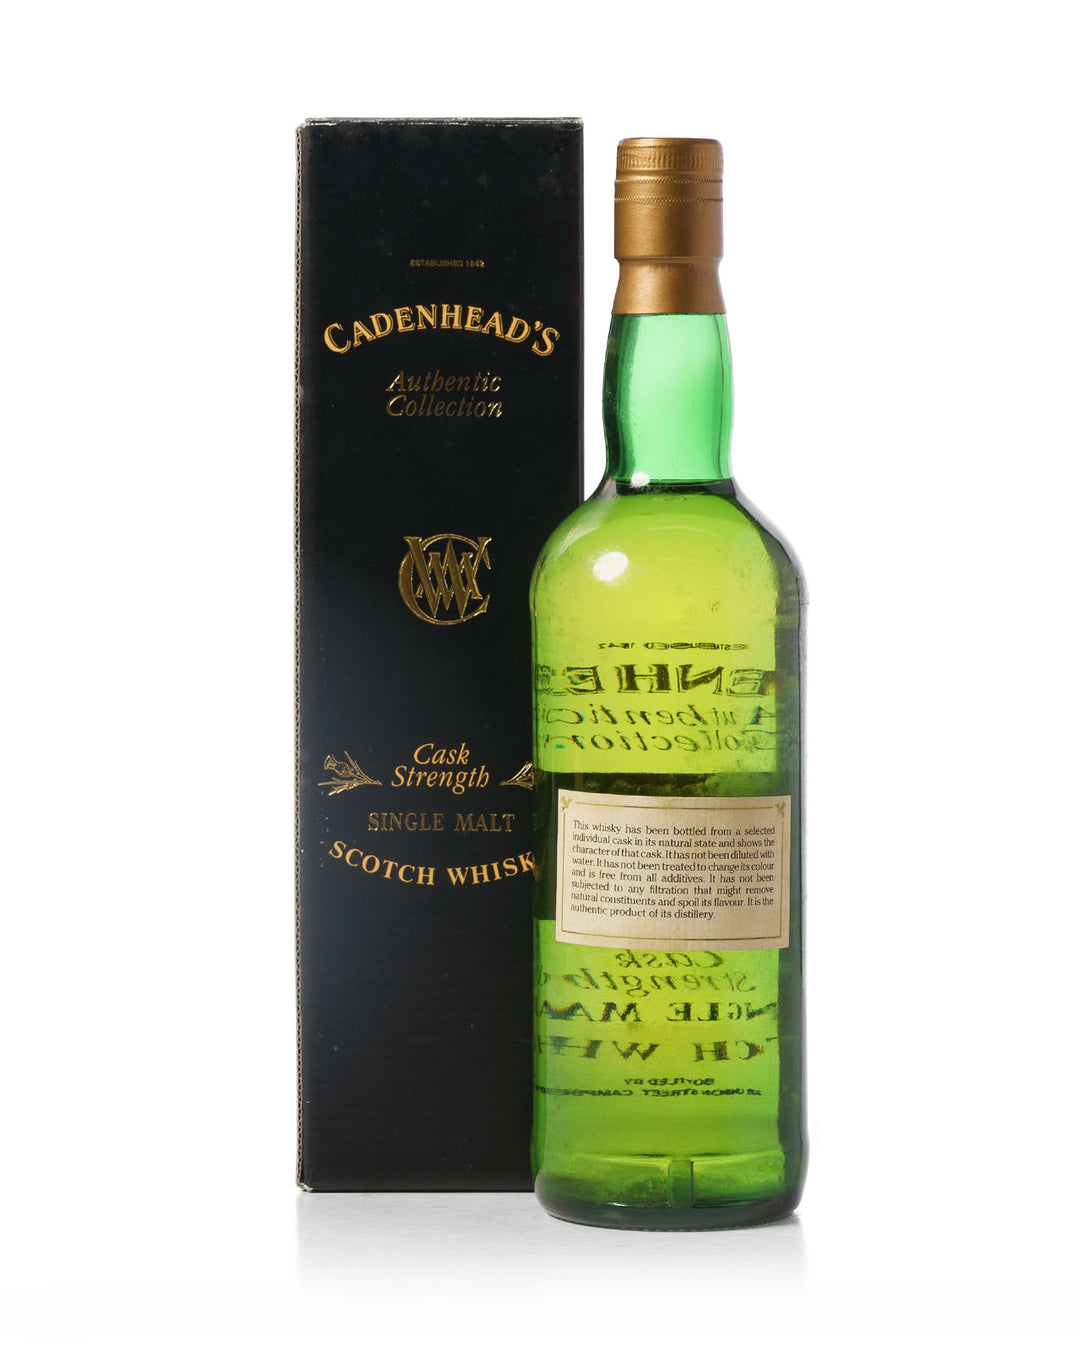 St Magdalene 1982 11 Year Old Cadenhead's Authentic Collection Bottled 1994